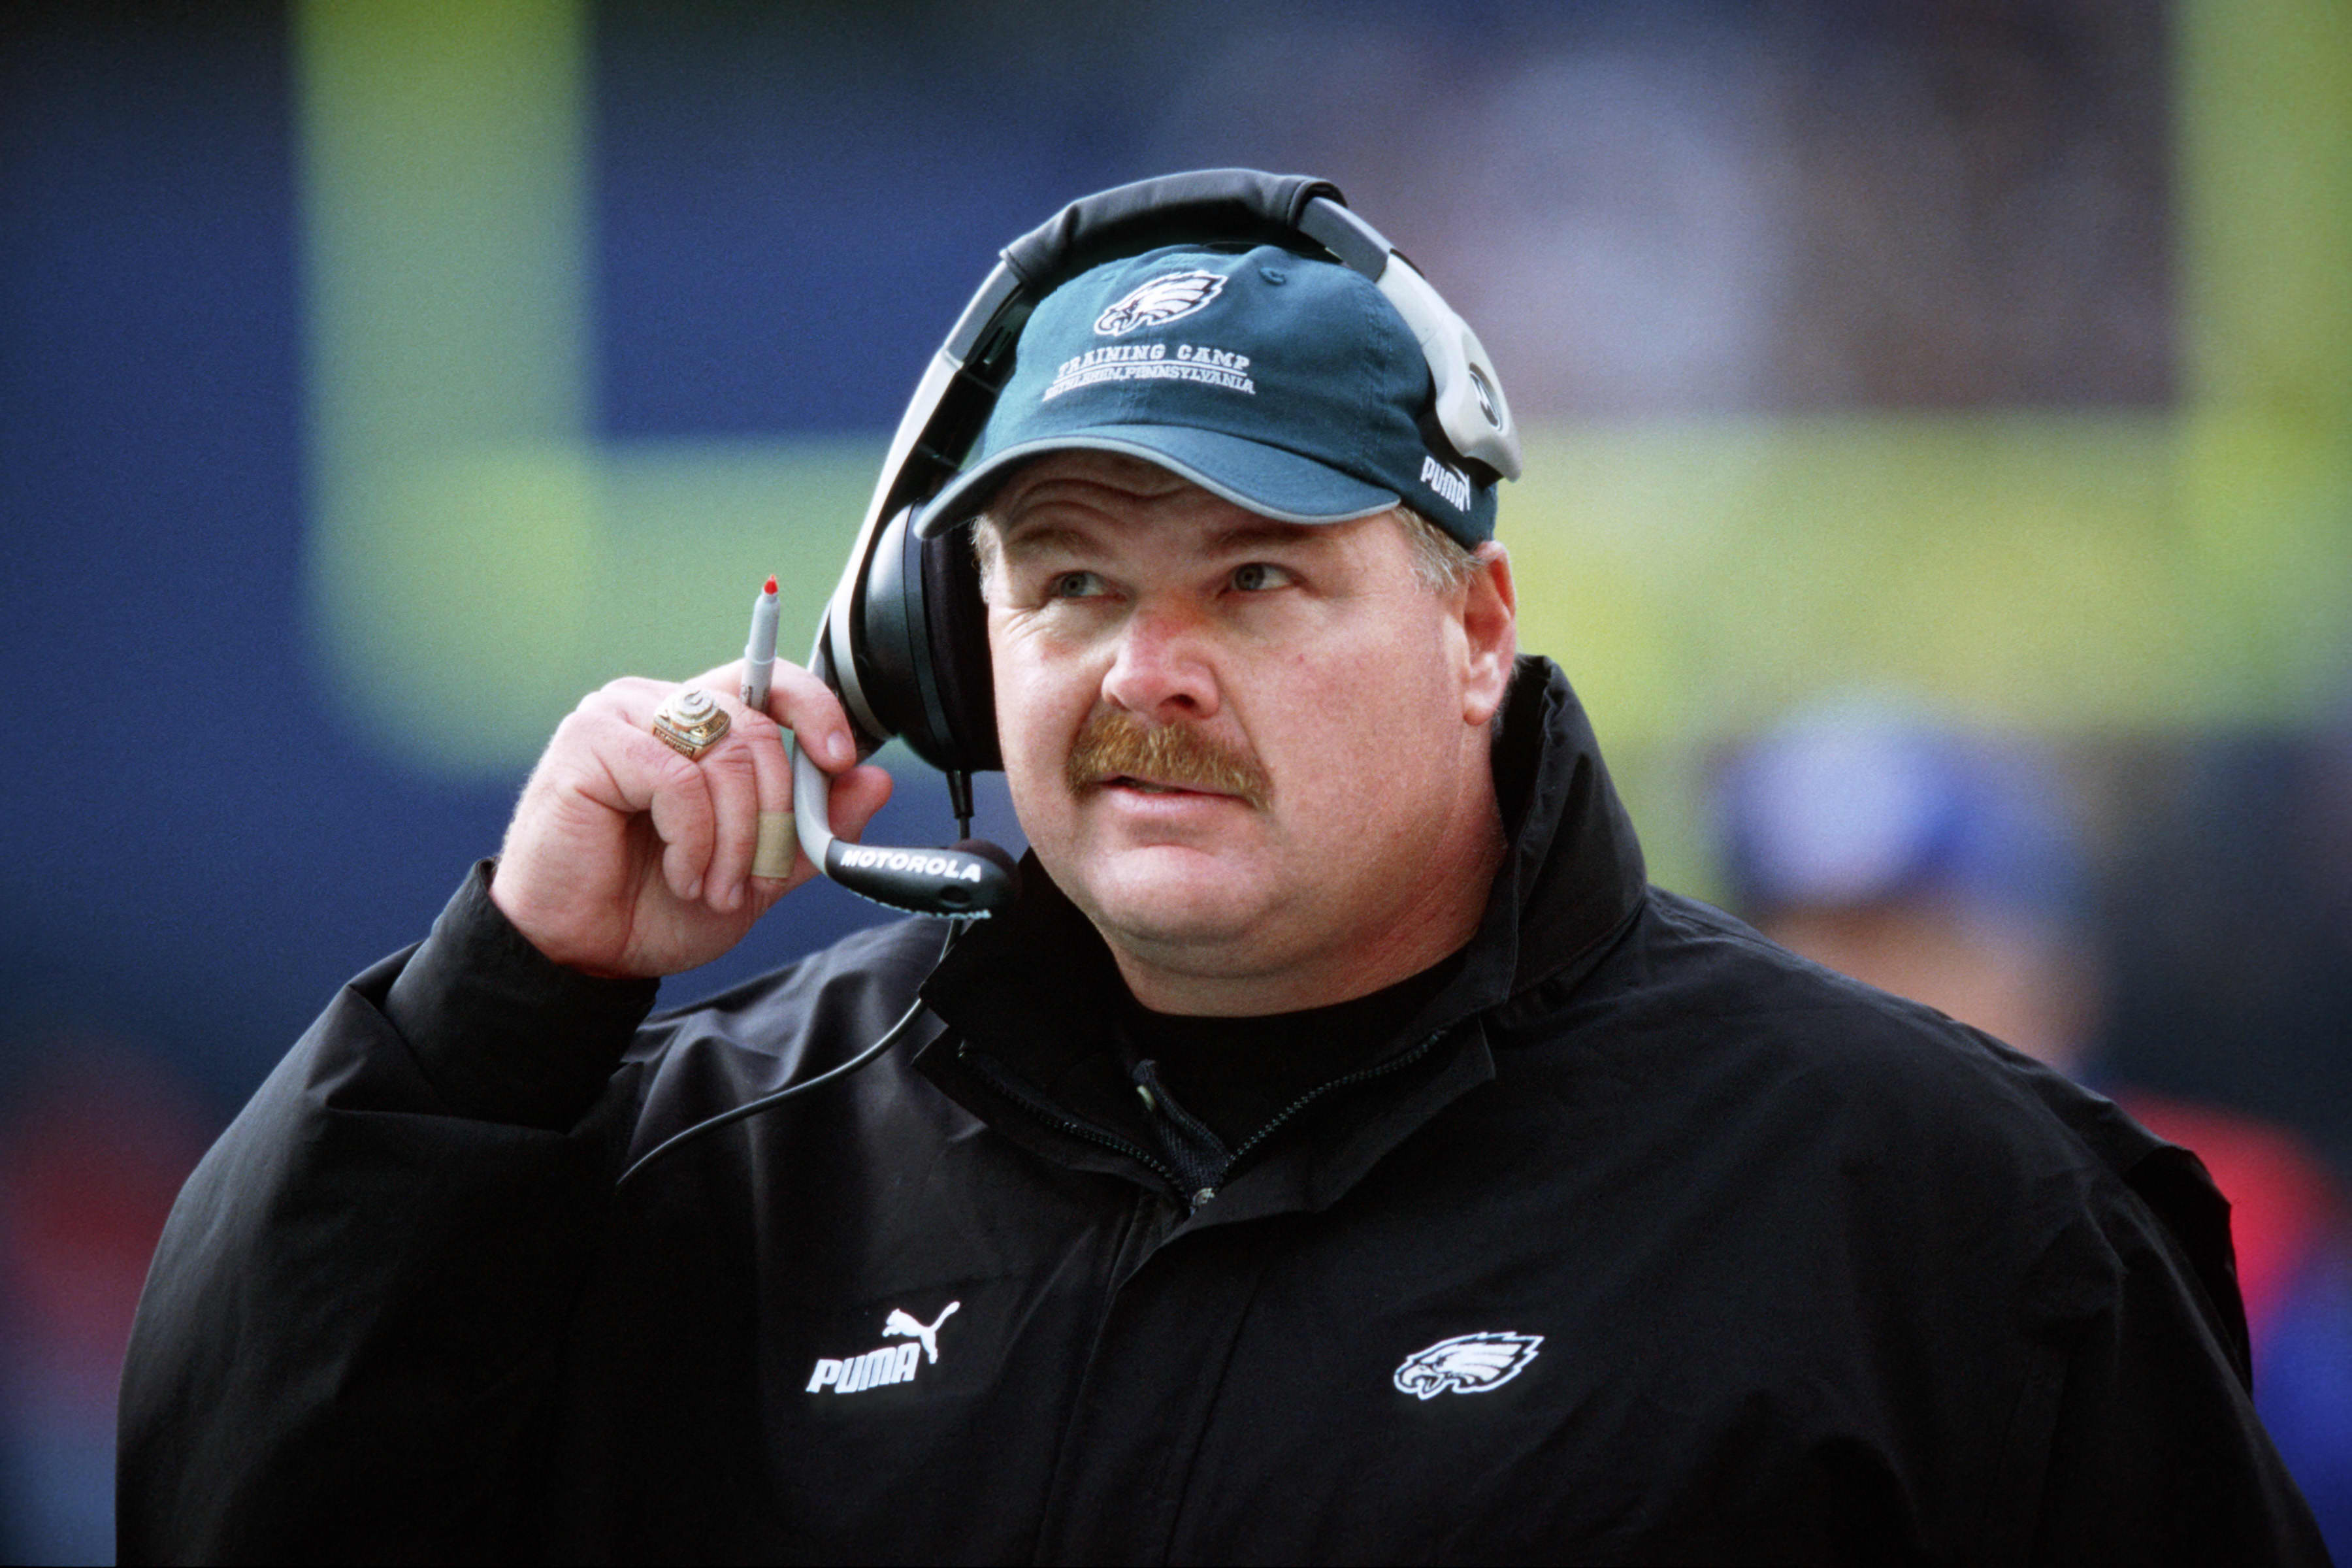 How Andy Reid landed his first NFL head coaching job at age 40